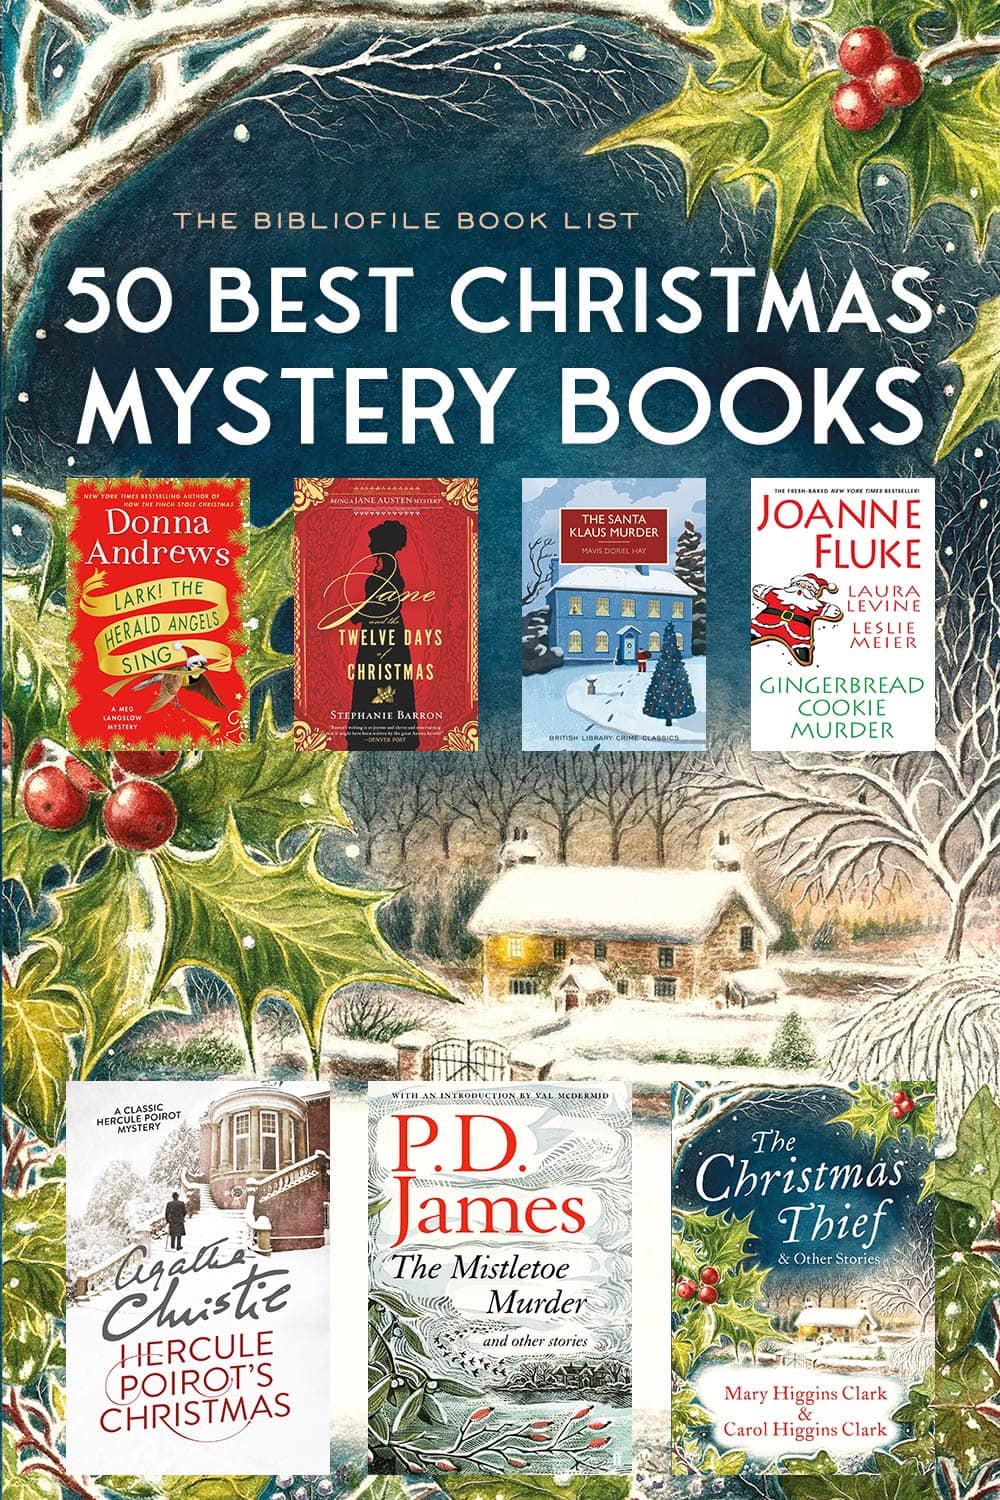 50 Best Christmas Mysteries for the Holidays The Bibliofile